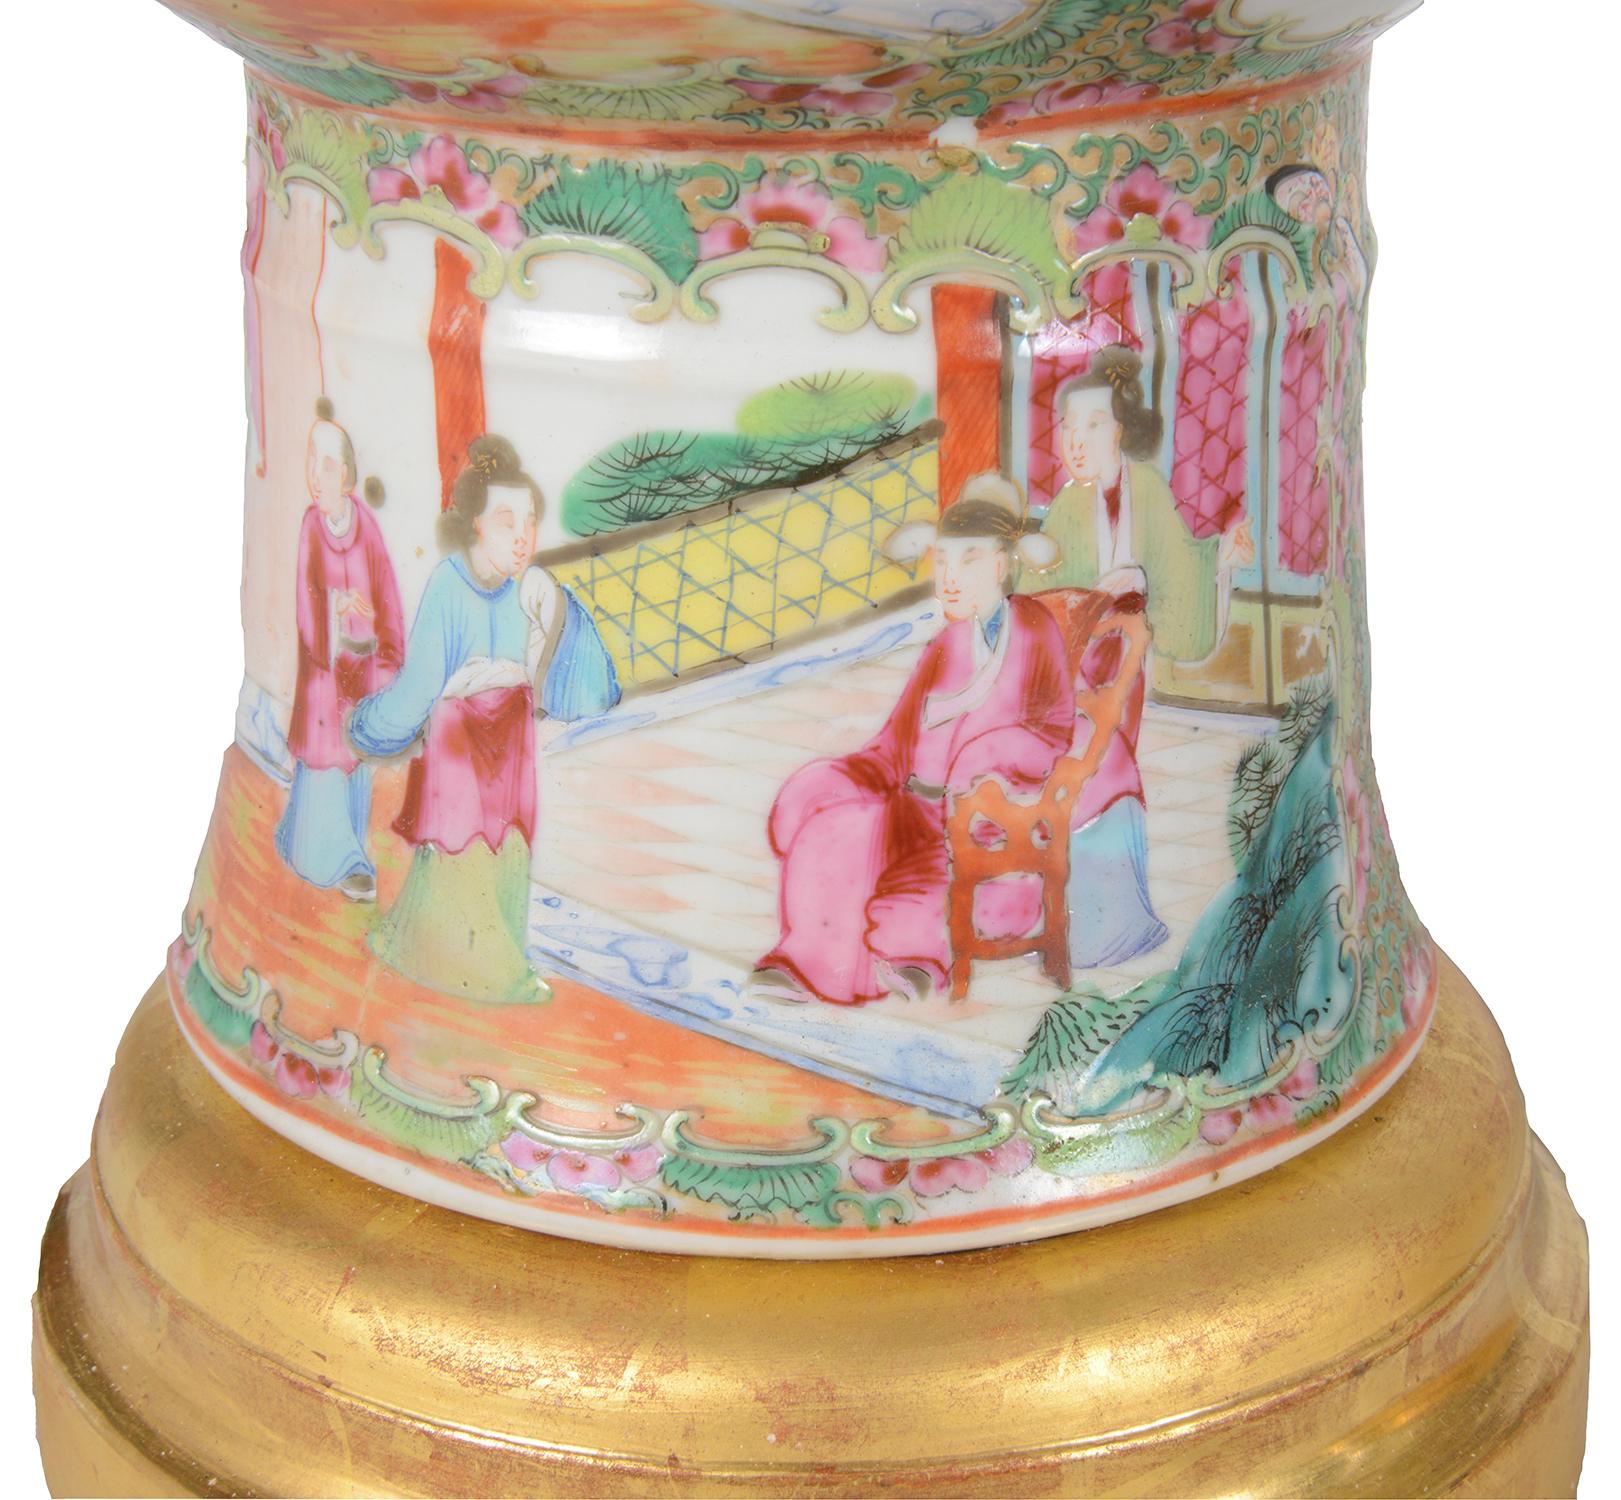 Hand-Painted Pair 19th Century Chinese Rose Medallion Vases / Lamps For Sale